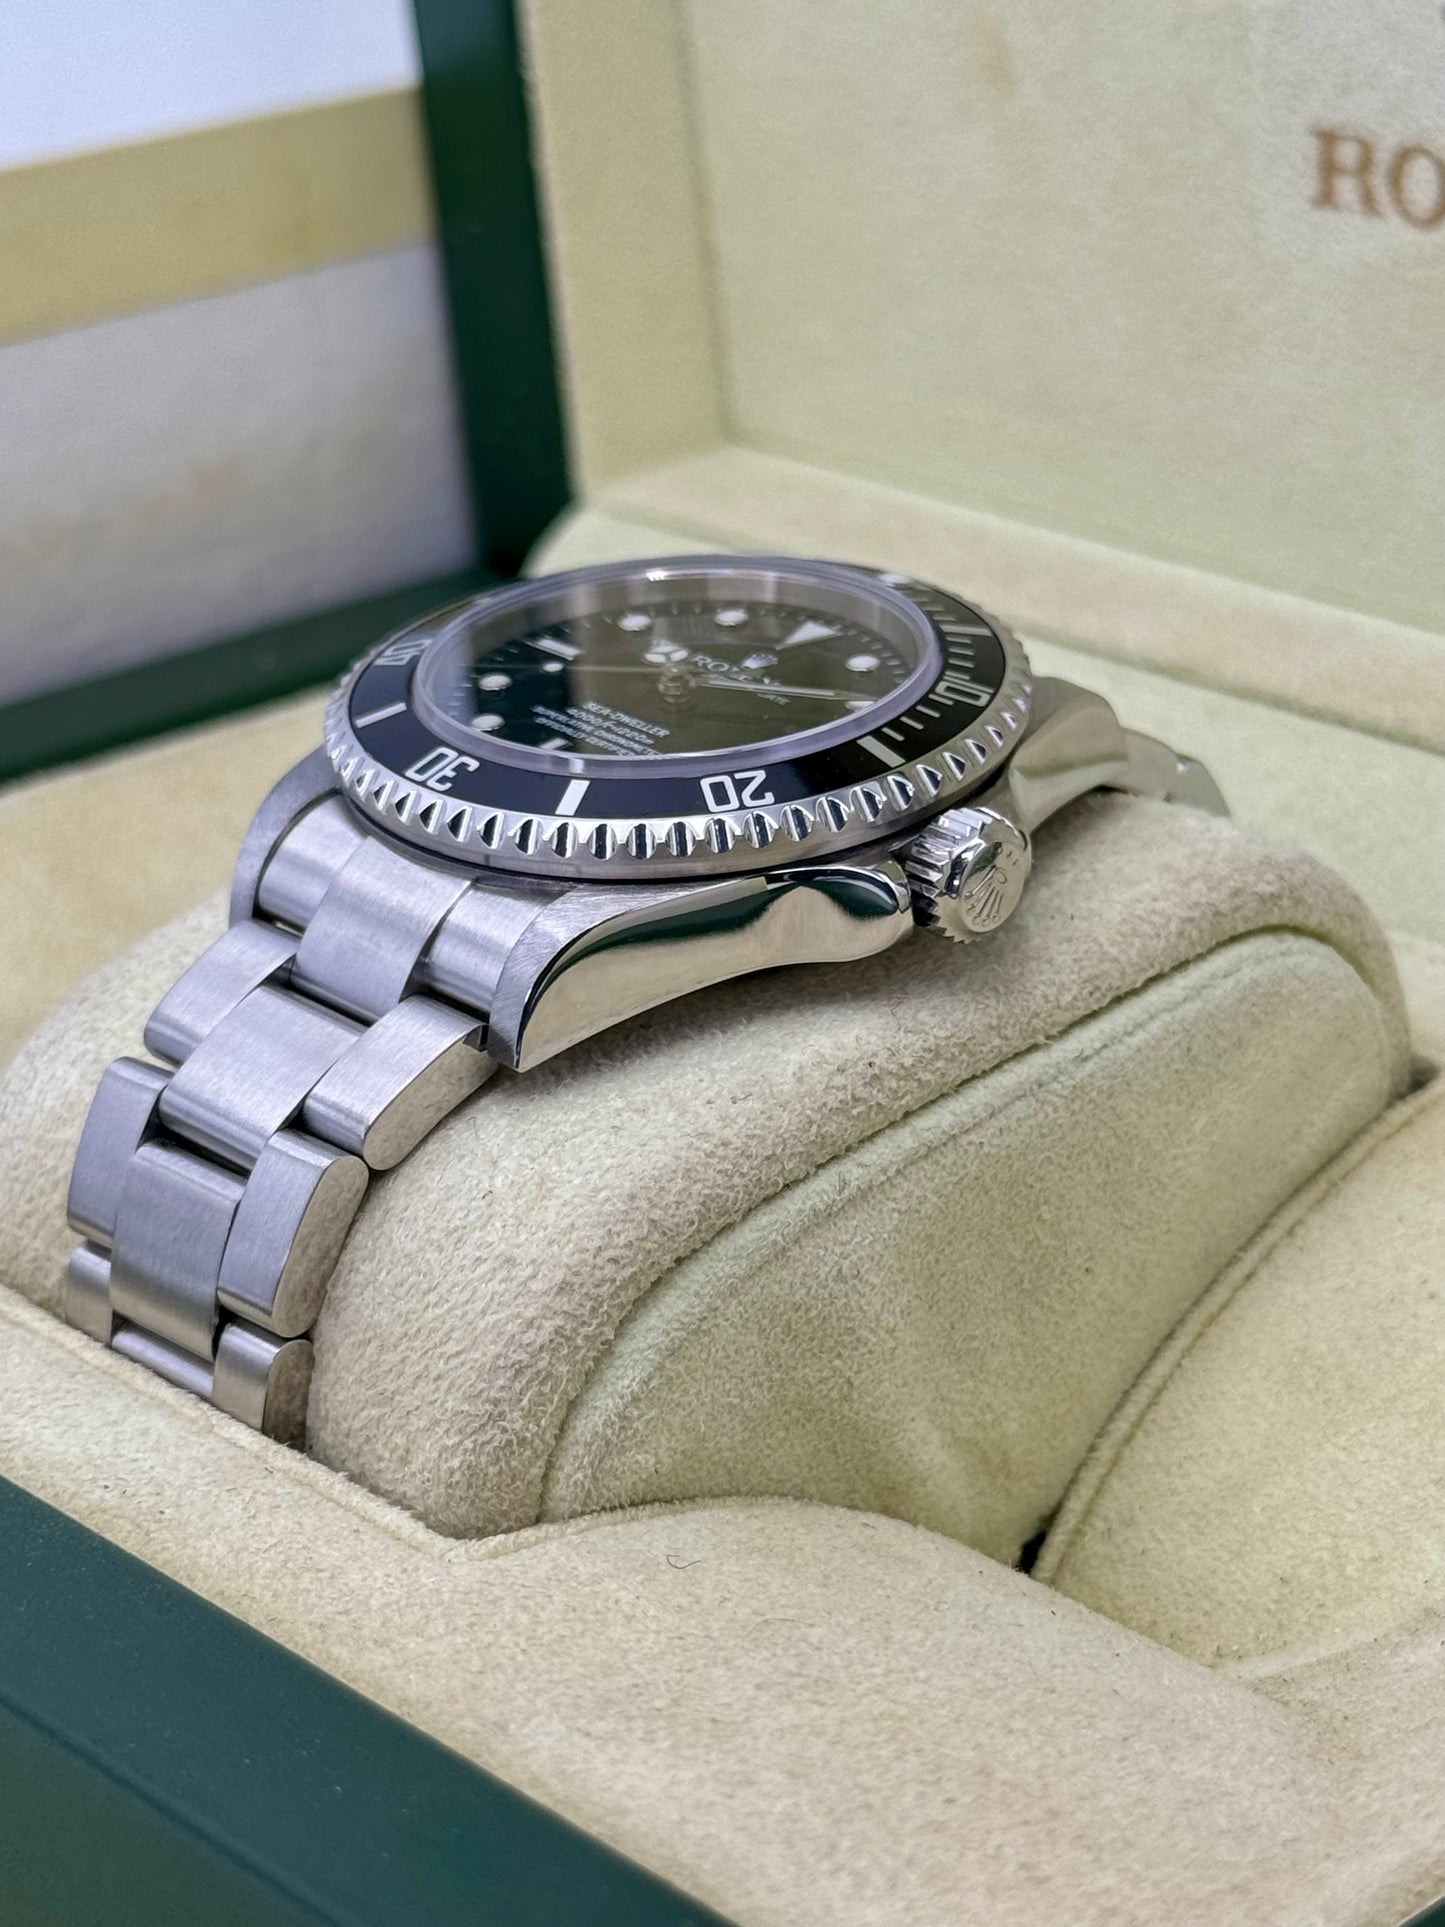 2005 Rolex Sea-Dweller 40mm 16600 Stainless Steel Black Dial - MyWatchLLC